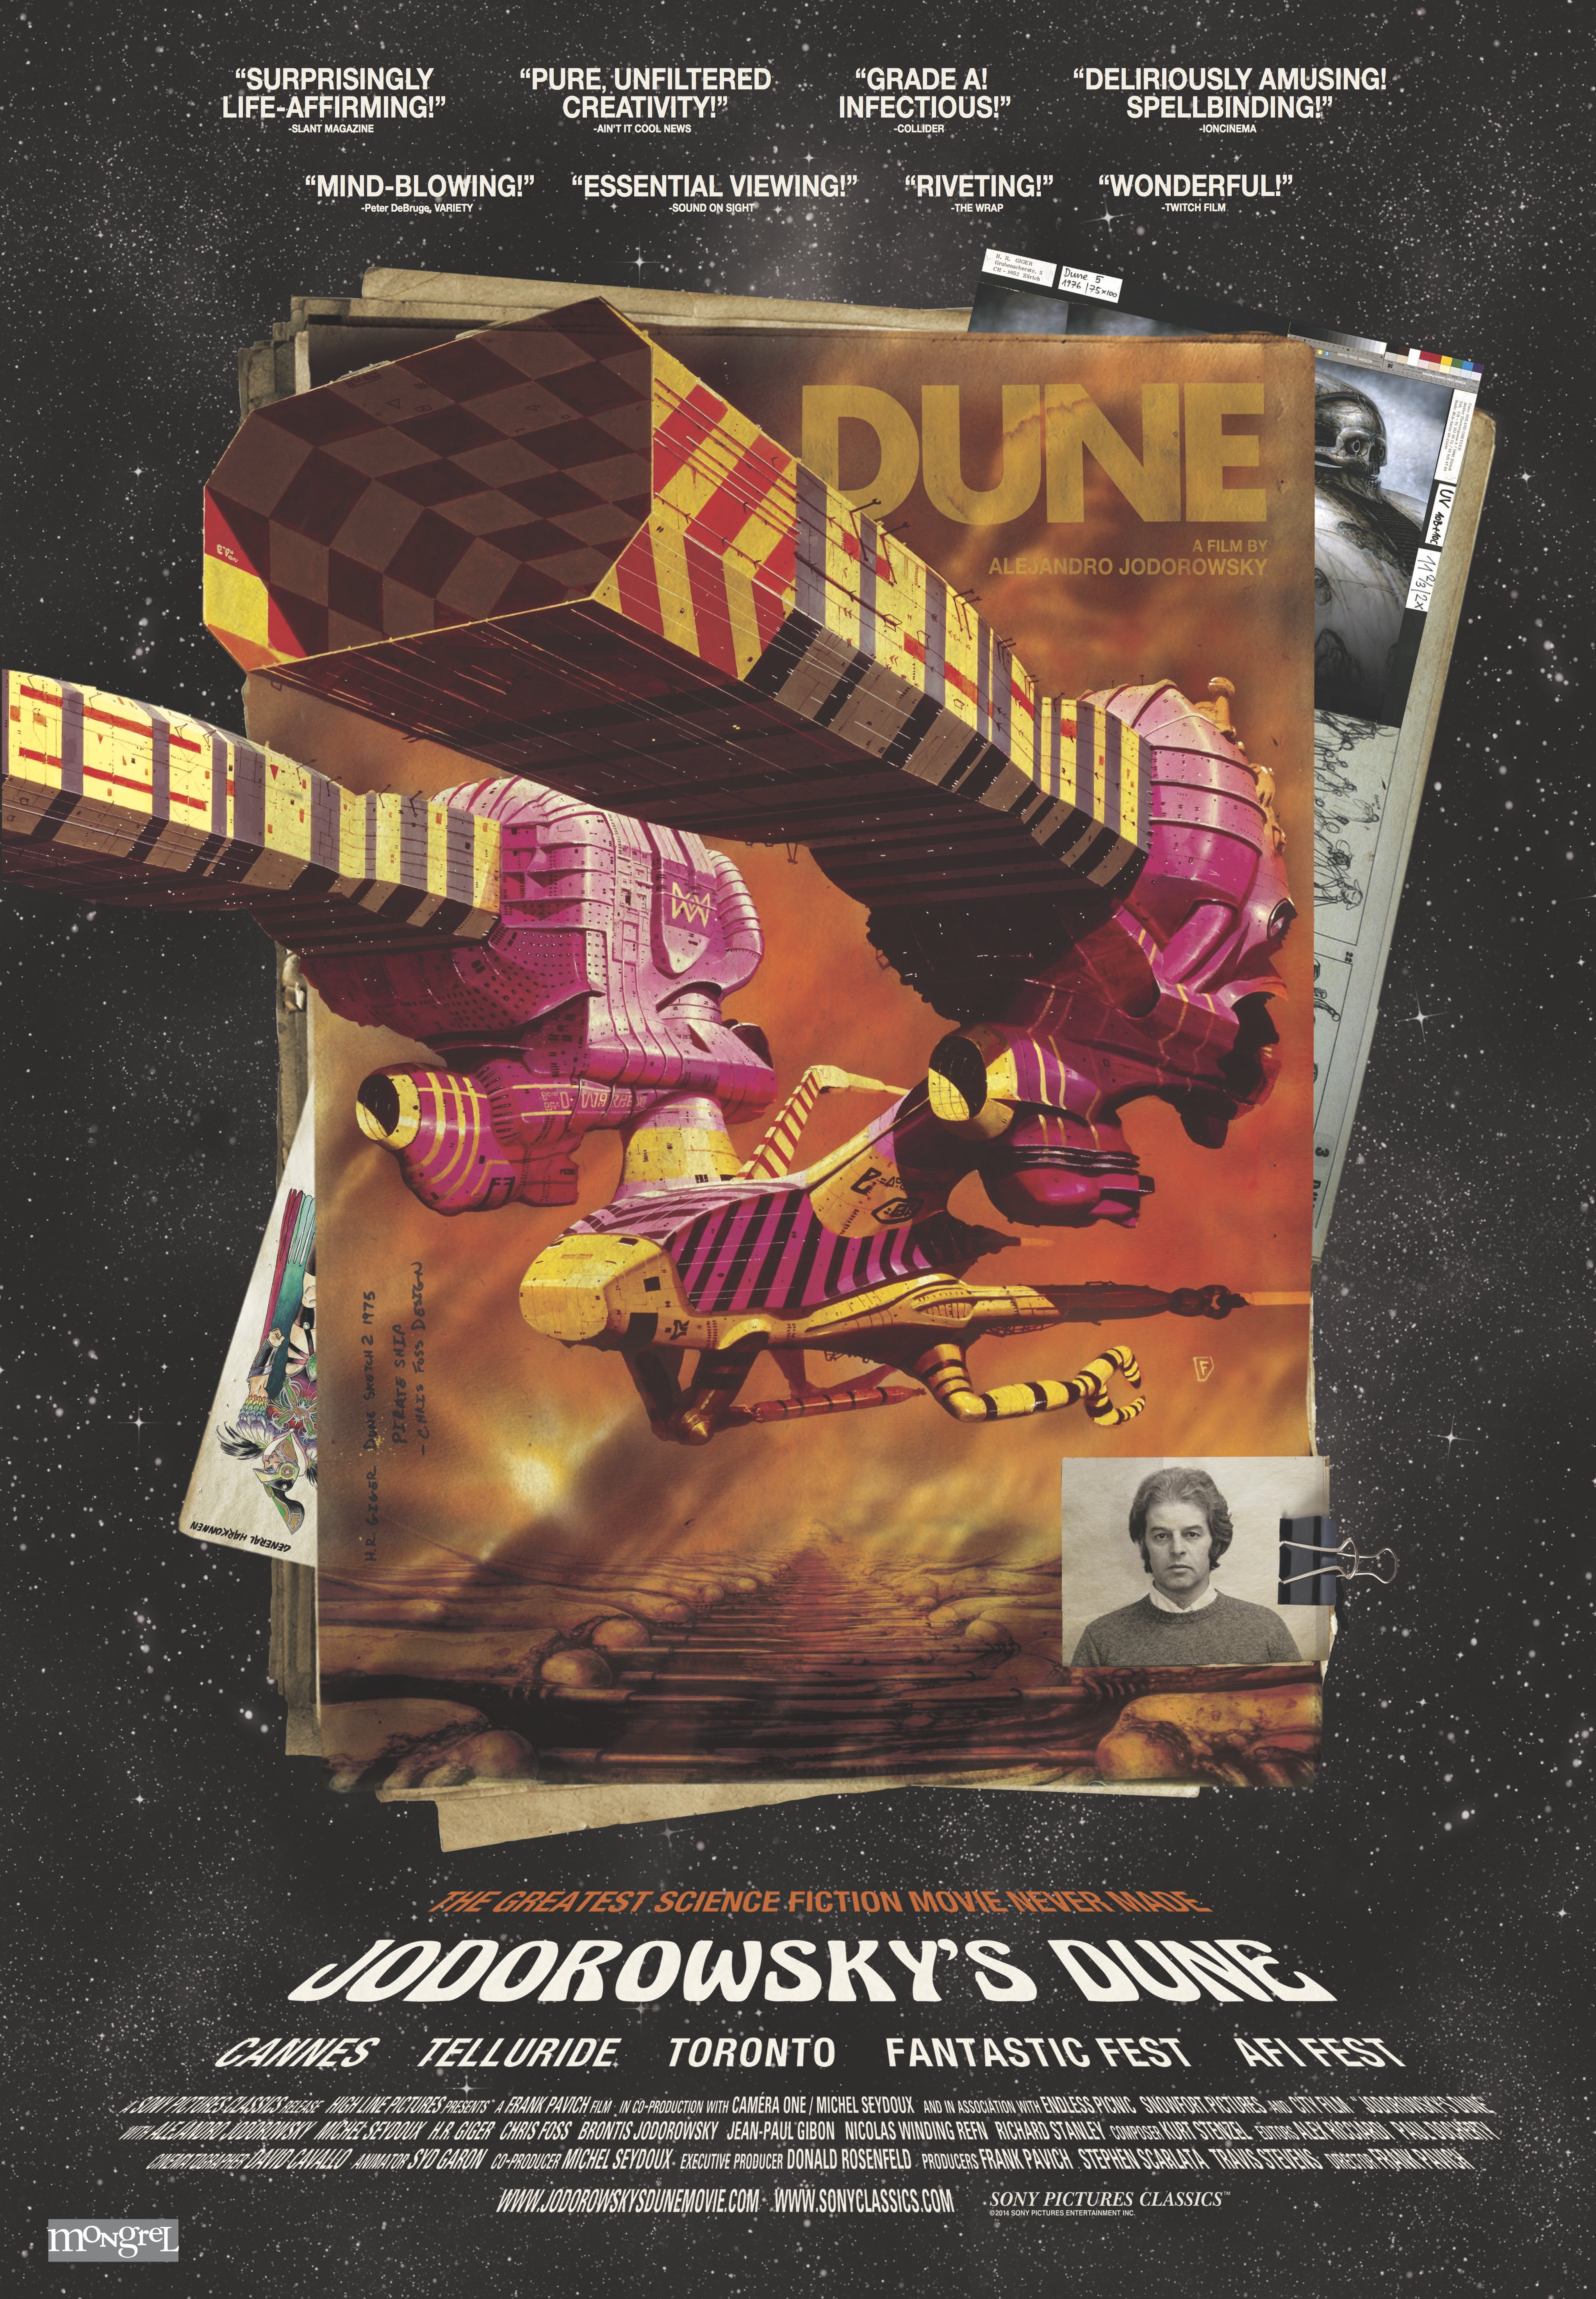 Poster of the movie Jodorowsky's Dune